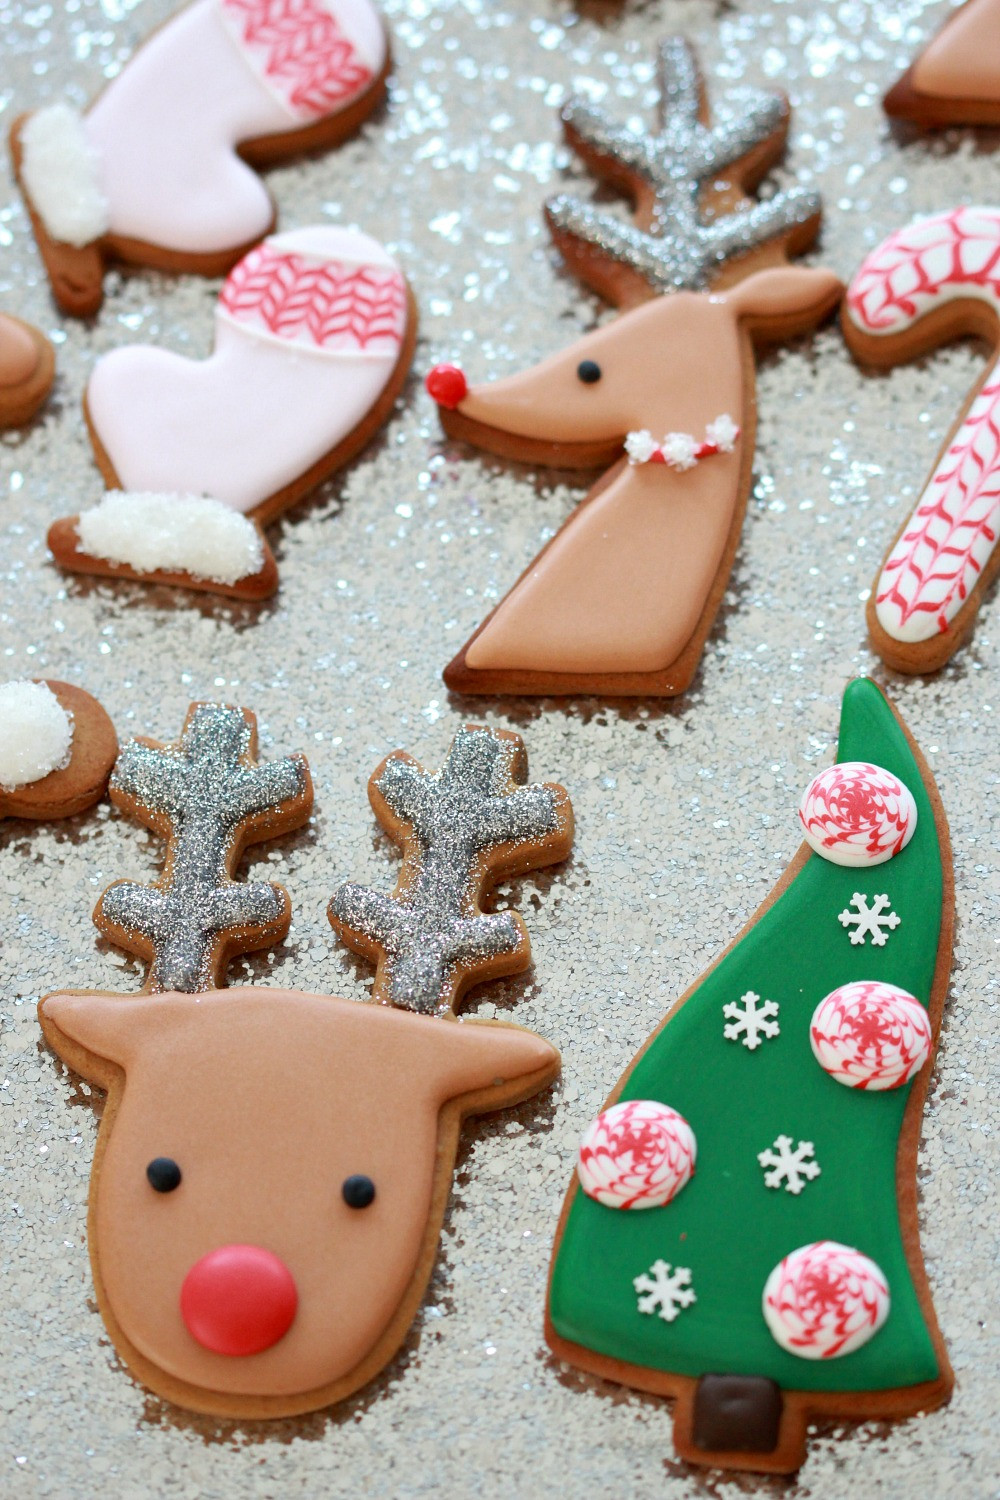 Christmas Cookies Decorated
 Video How to Decorate Christmas Cookies Simple Designs